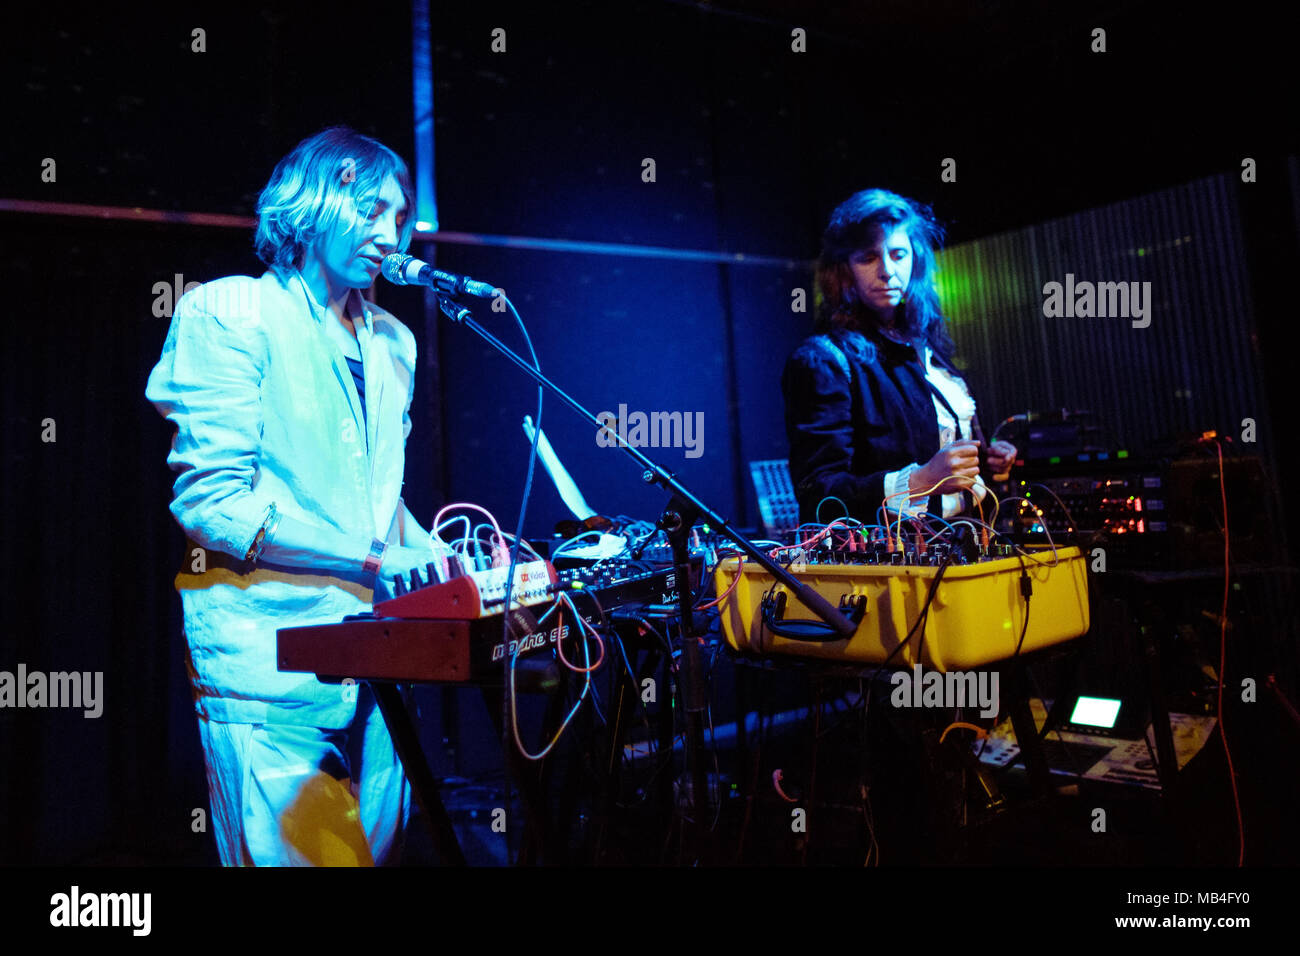 Denmark, Copenhagen - April 6, 2018. The American electro pop band The Blow  performs a live concert at Ideal Bar in Copenhagen. Here Khaela Maricich is  seen live on stage with Melissa